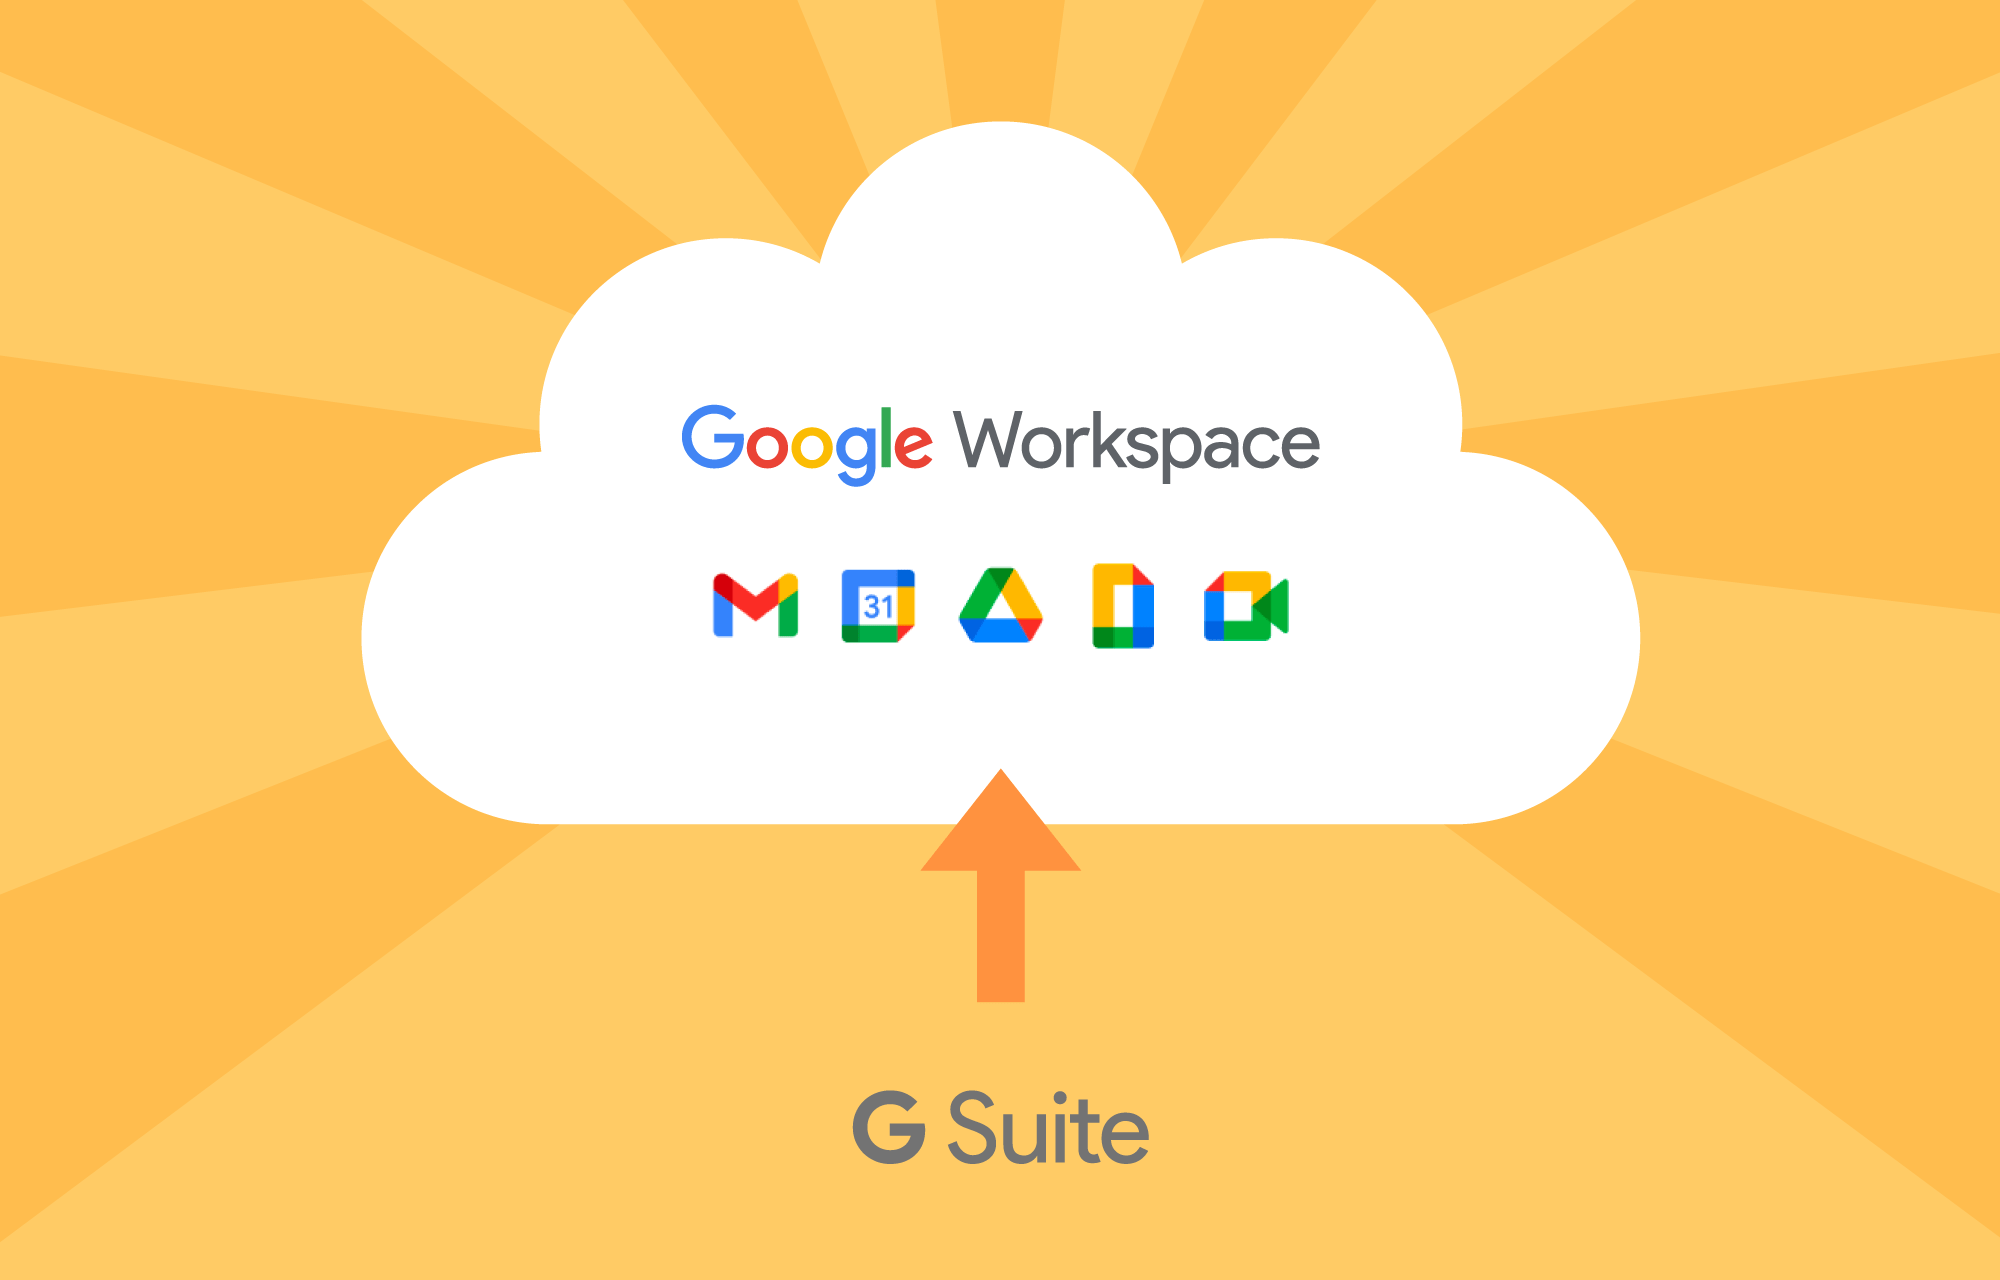 G Suite is history – please welcome Google Workspace!